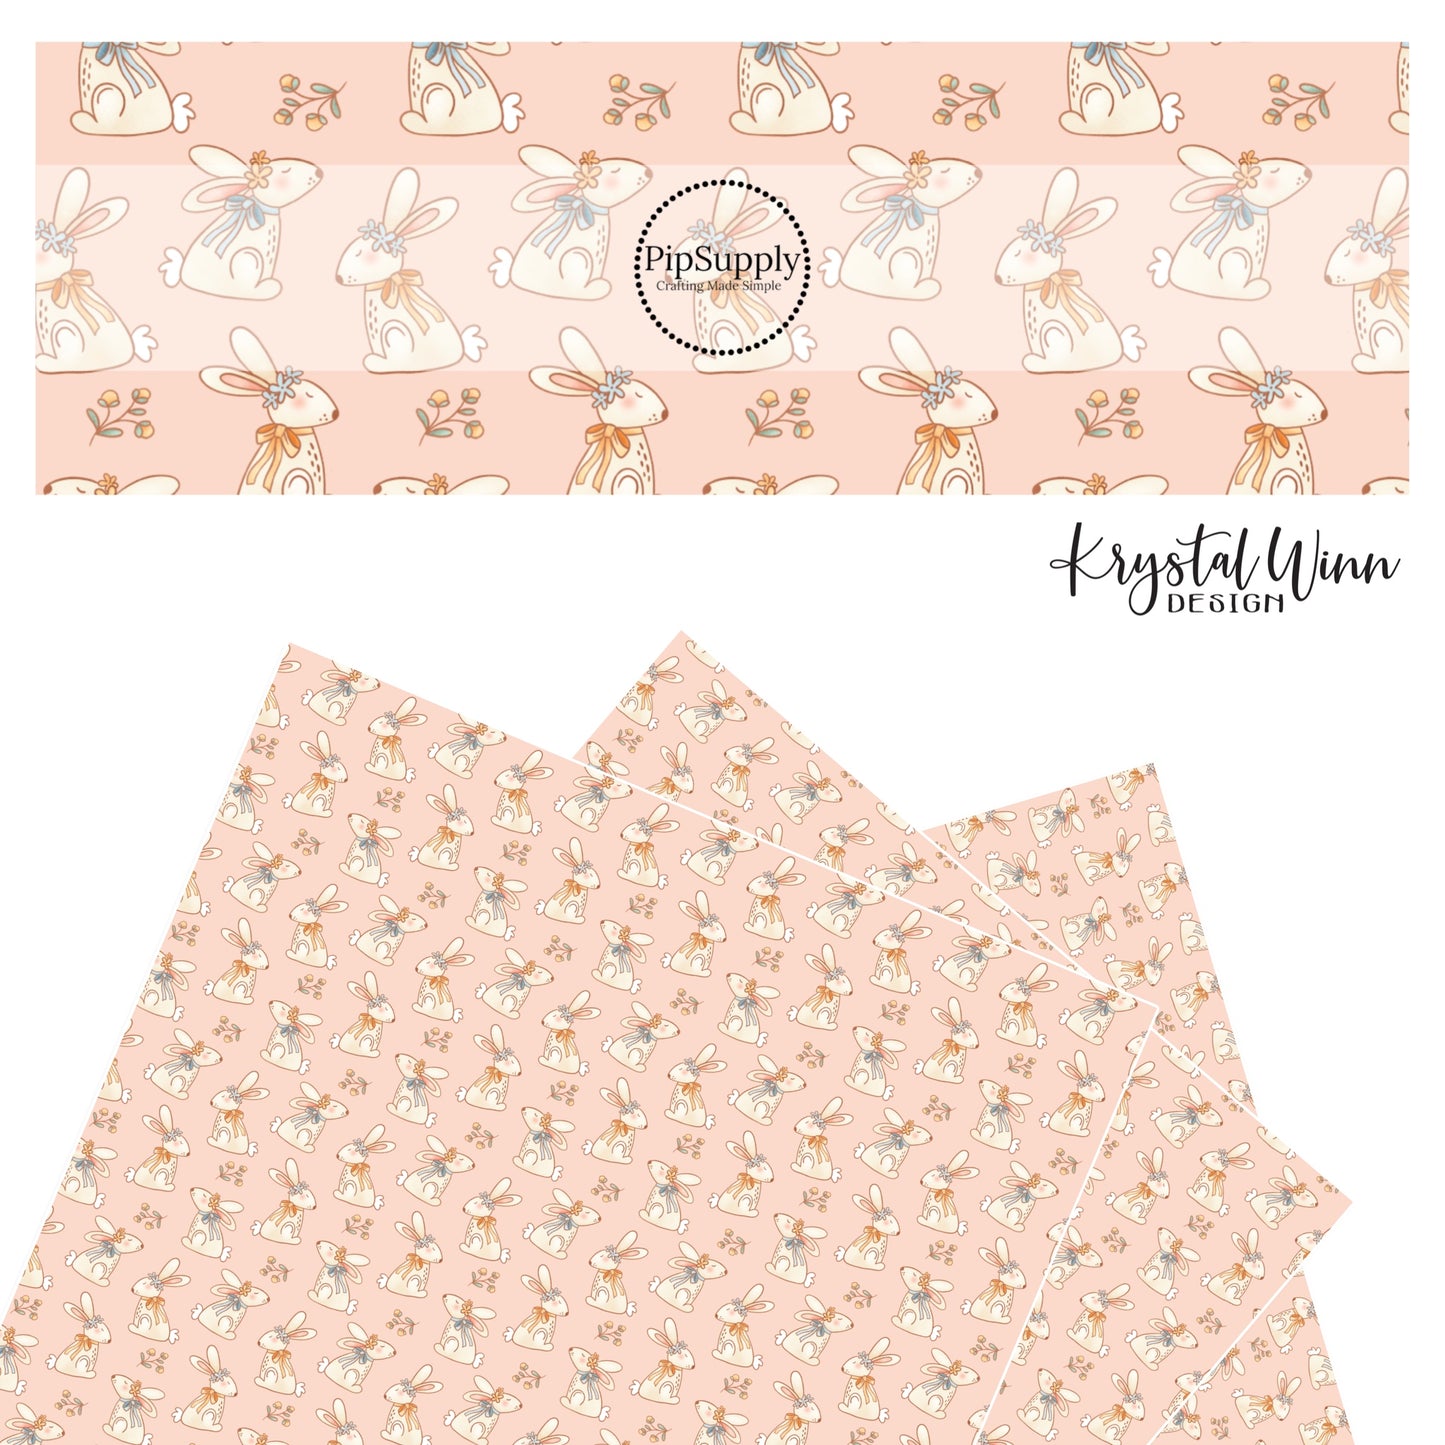 cream bunnies with floral crown and bow ties with flowers on pink faux leather sheet 